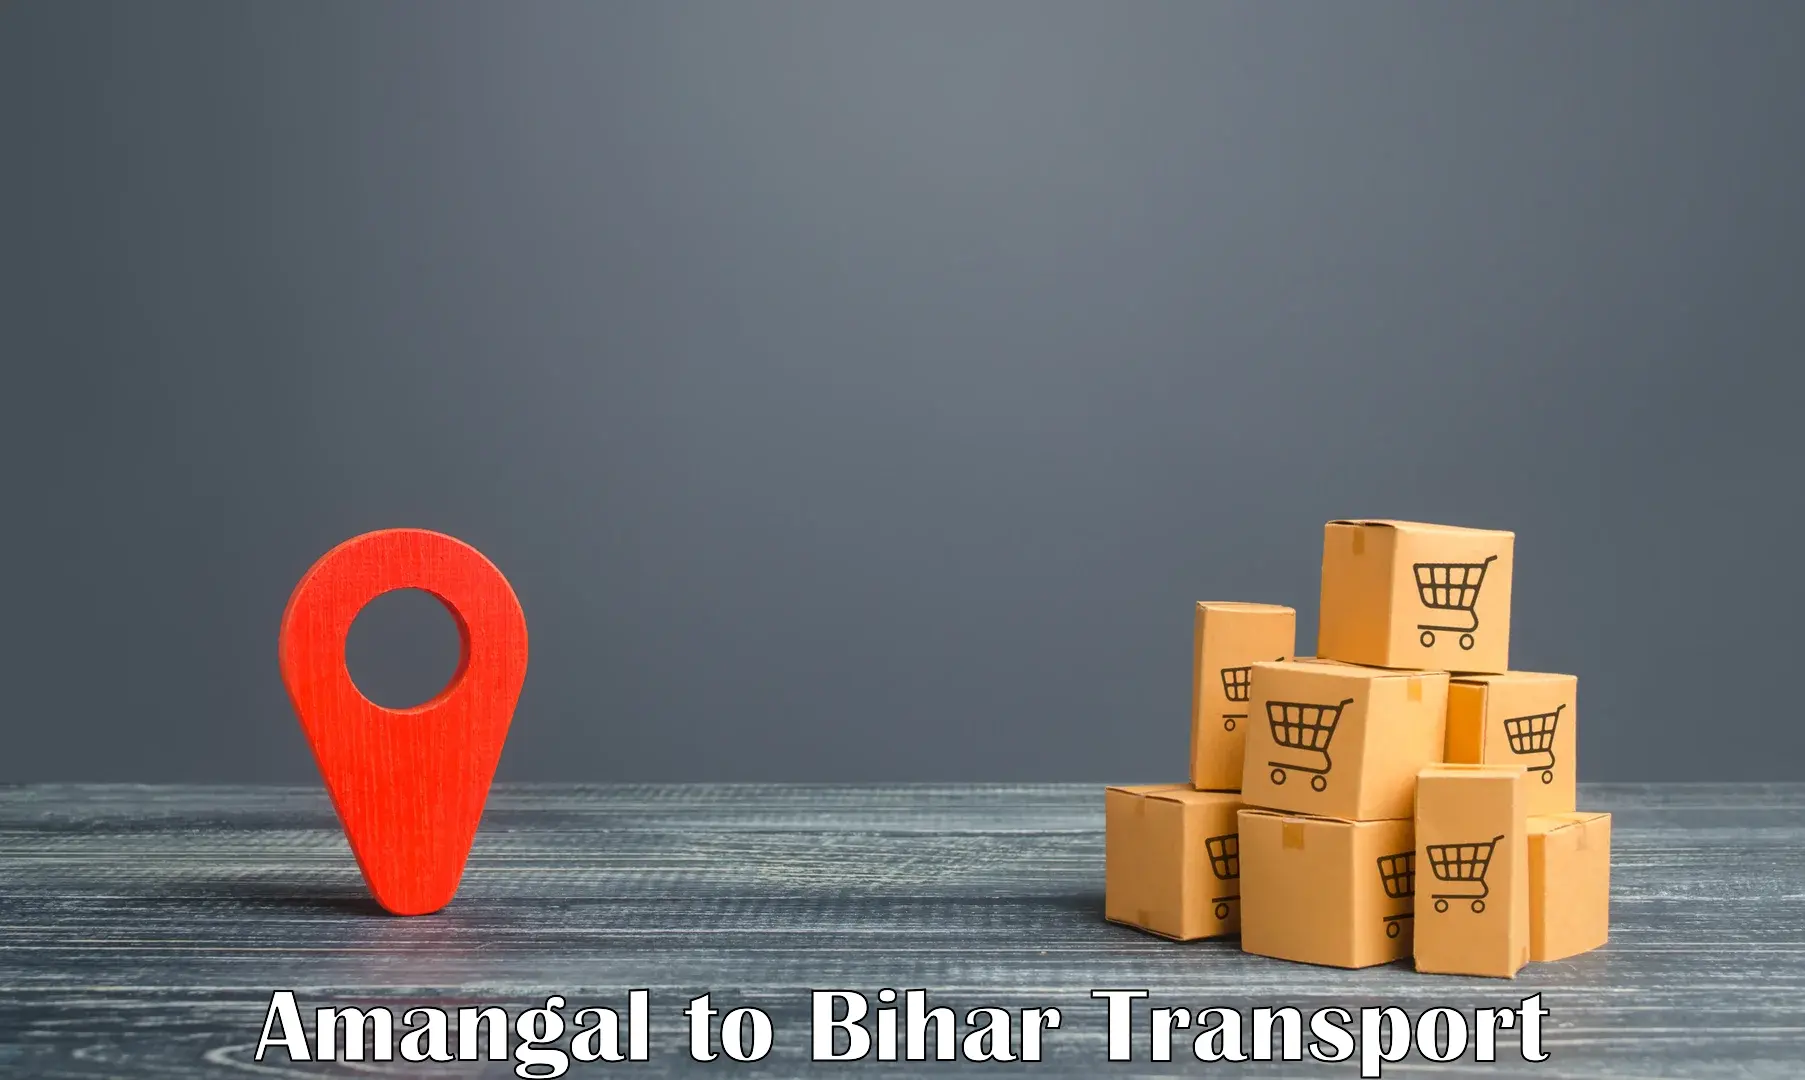 Road transport online services in Amangal to Dehri